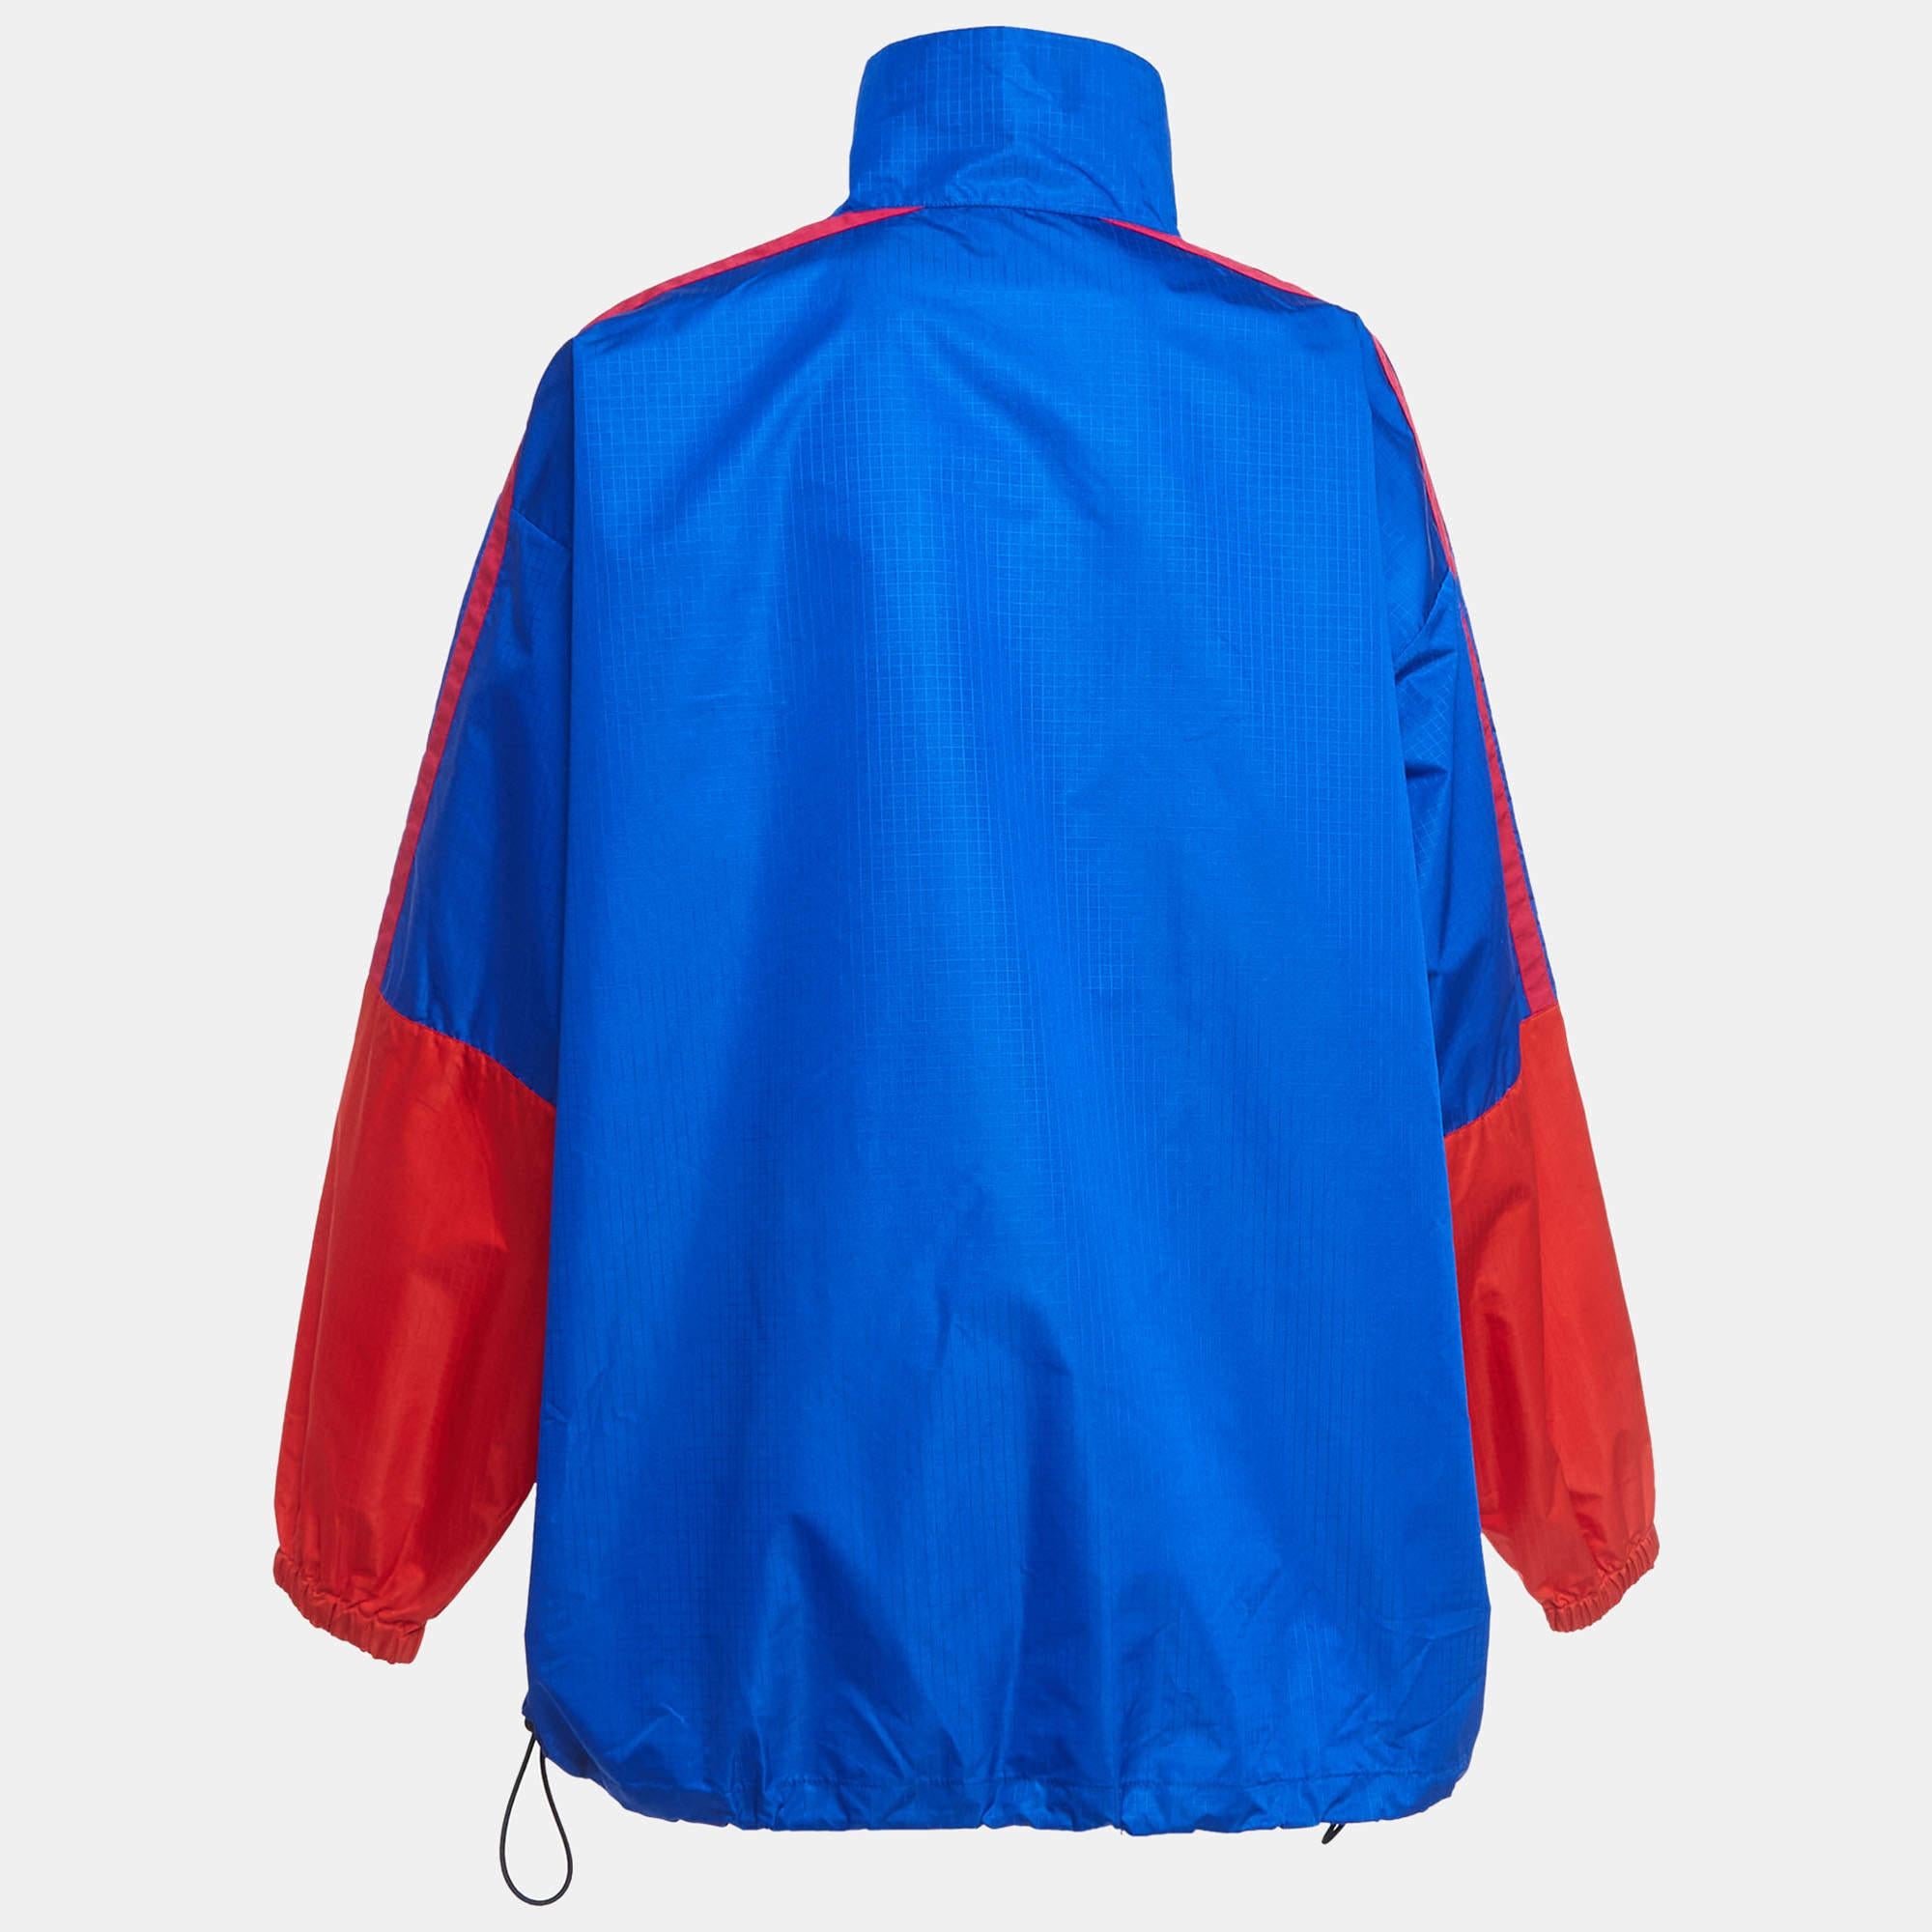 The Balenciaga jacket is a sleek and stylish outerwear piece. Crafted from high-quality synthetic materials, it features a bold blue and red color scheme with the iconic Balenciaga logo emblazoned across the chest. Perfect for adding a pop of color